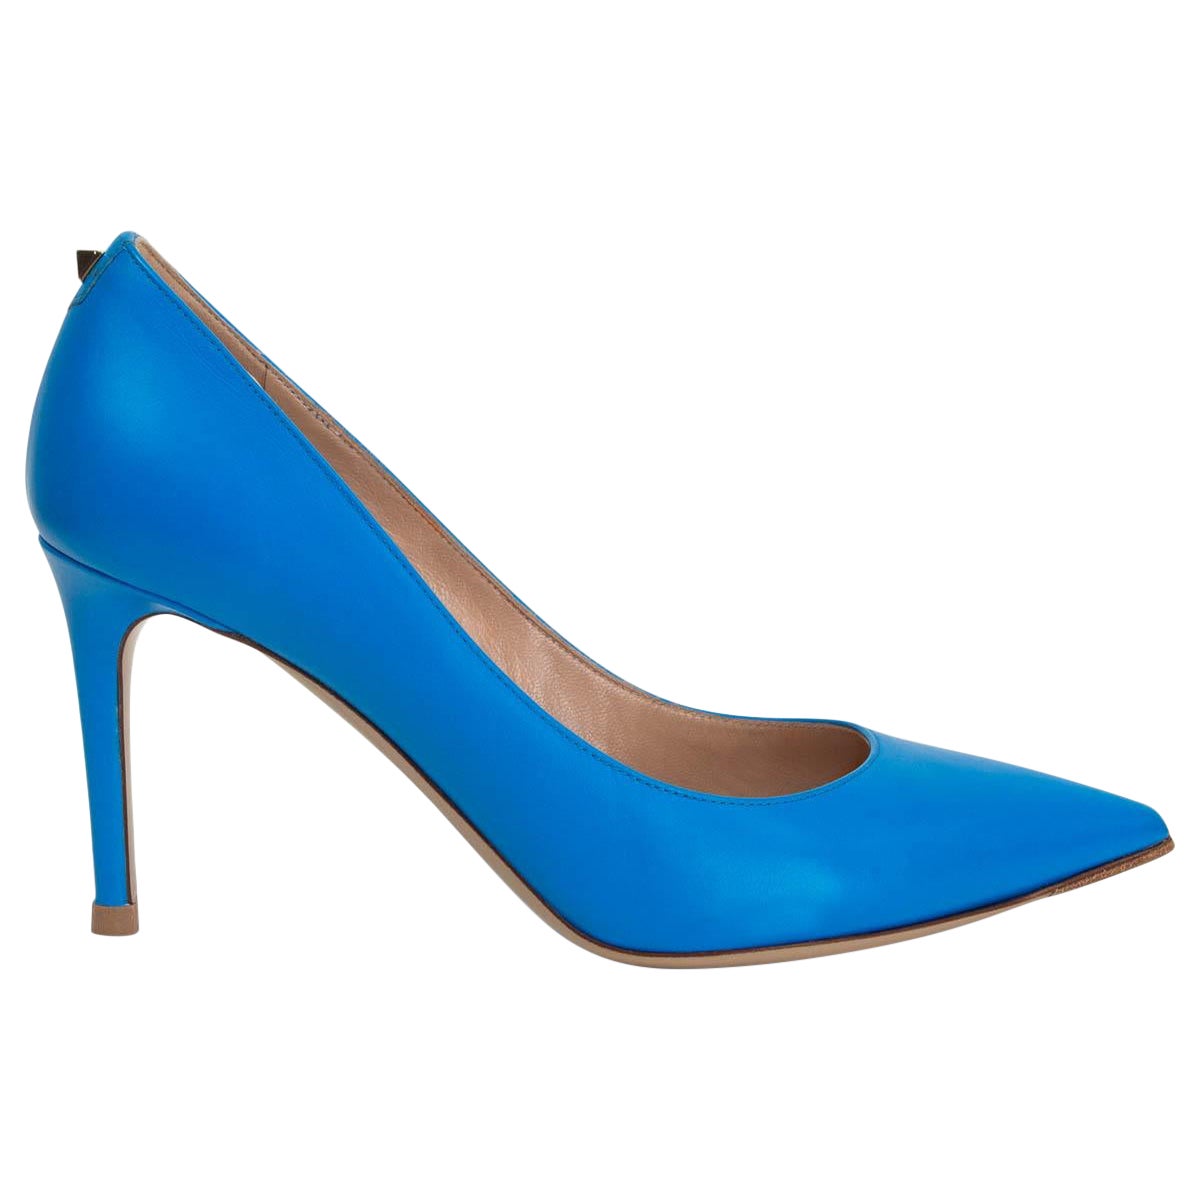 VALENTINO cyan blue leather ROCKSTUD 85 Pointed Toe Pumps Shoes 37.5